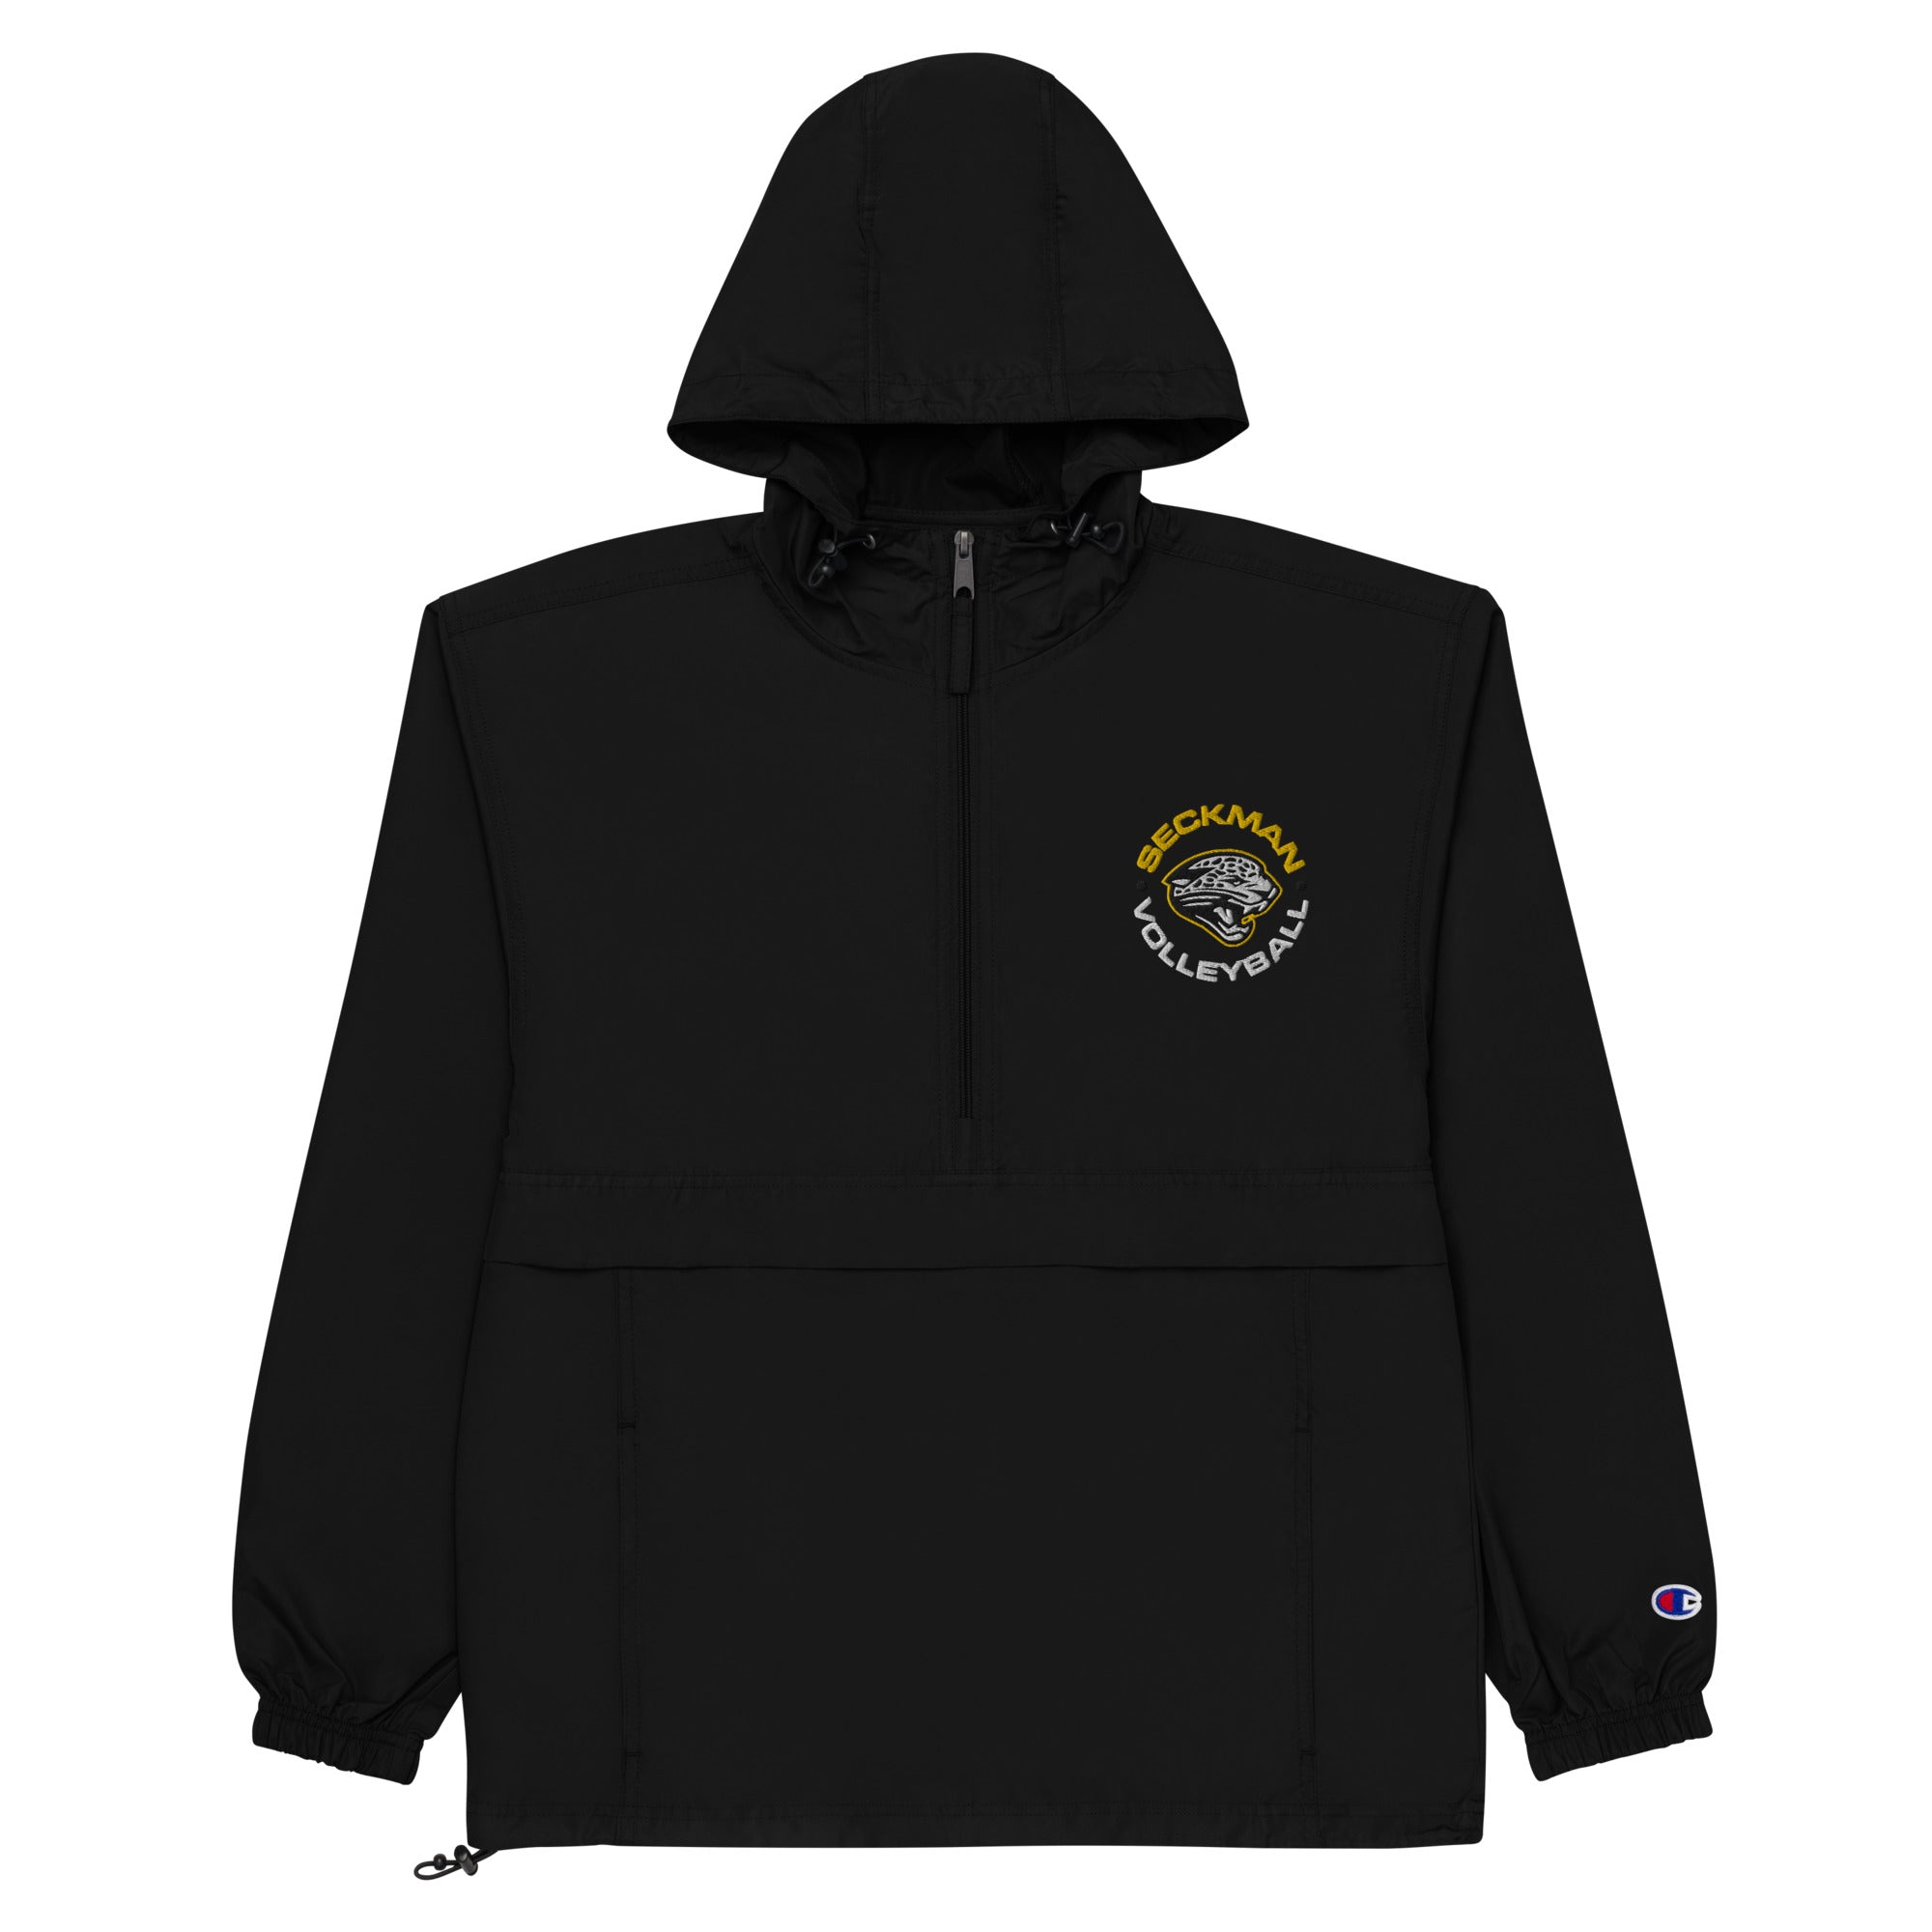 Seckman Volleyball Embroidered Champion Packable Jacket